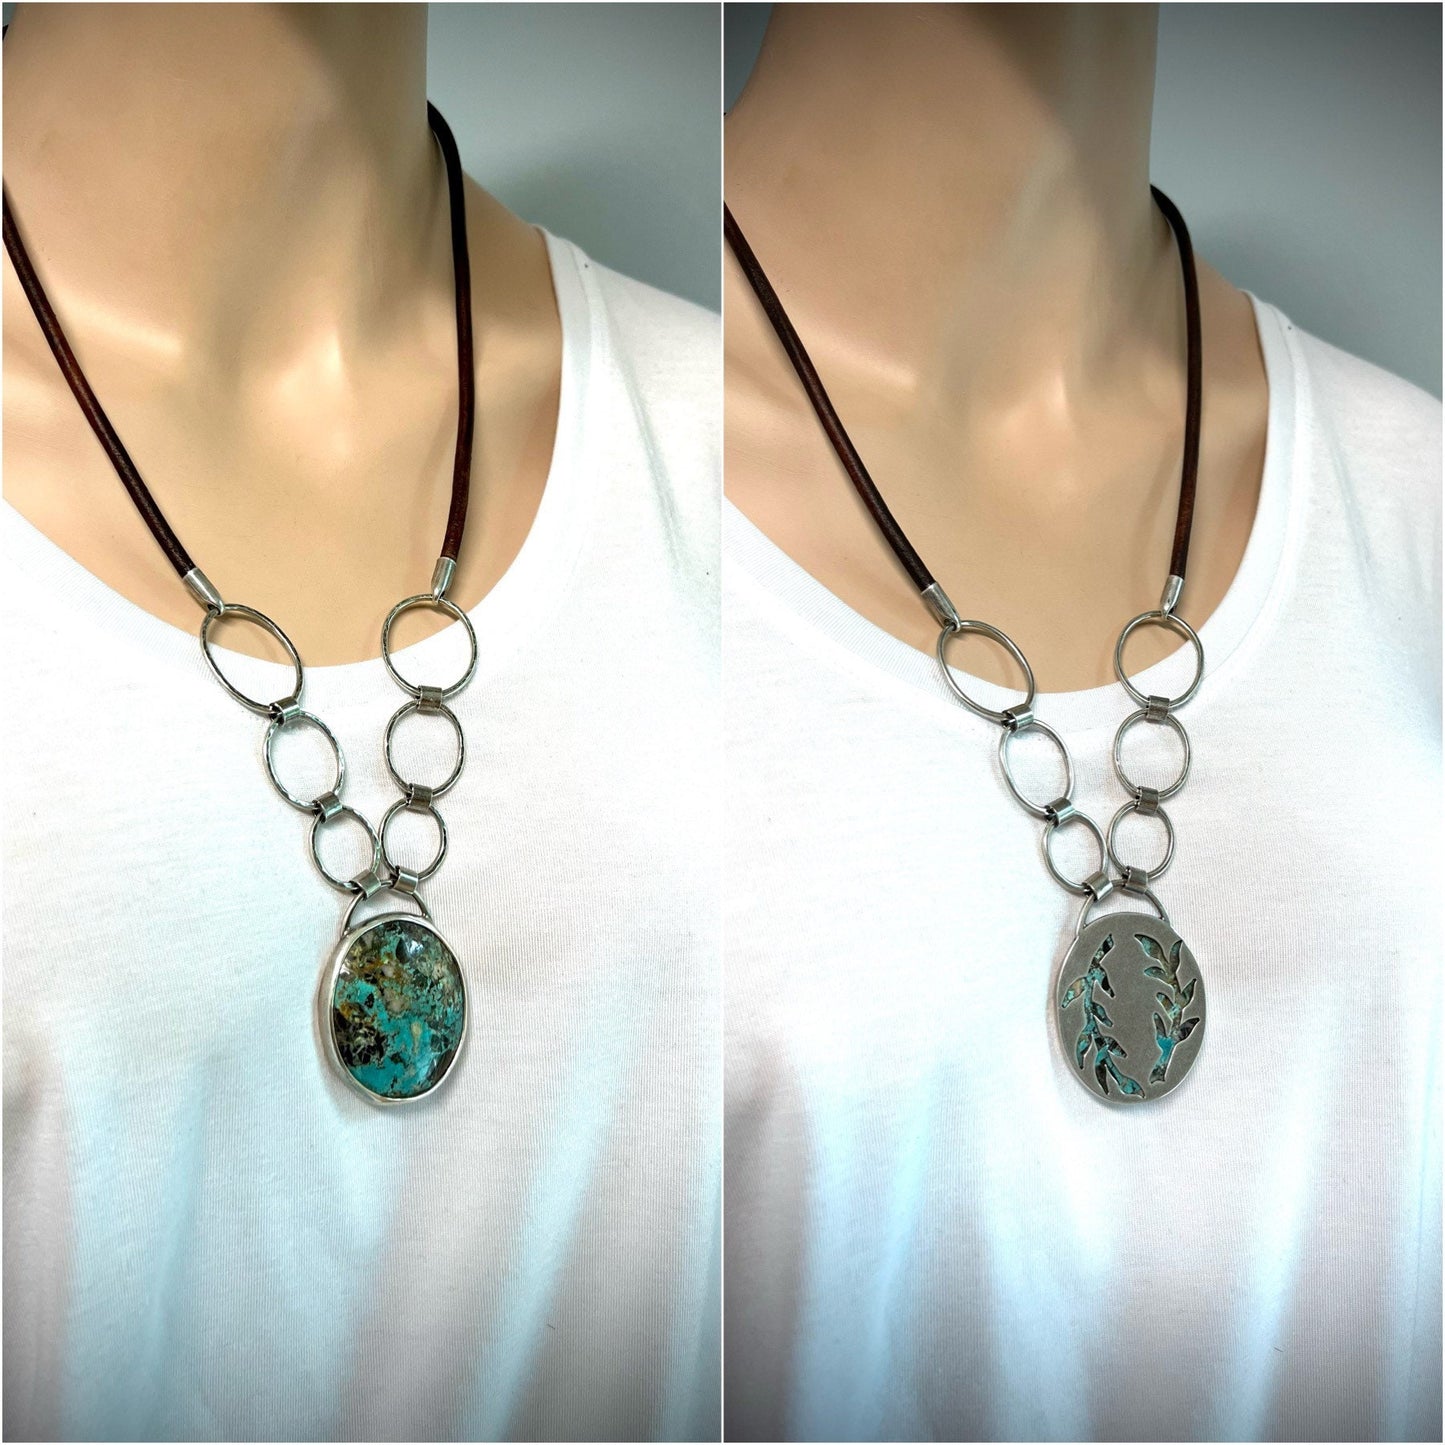 Turquoise Sterling Silver Necklace - Handmade One-of-a-kind Pendant on Genuine Leather Cord